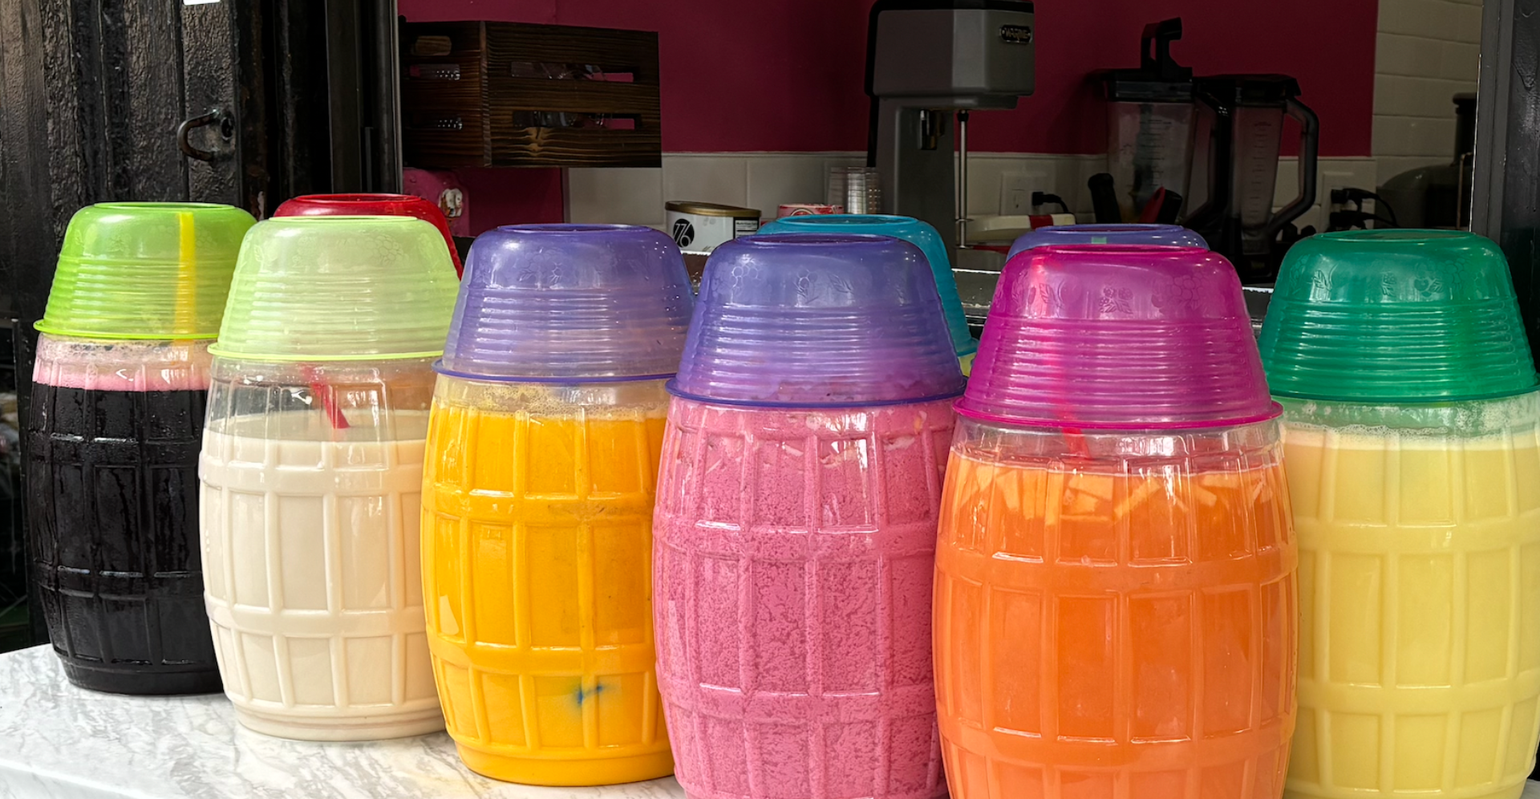 clear plastic barrels will brightly colored juices inside